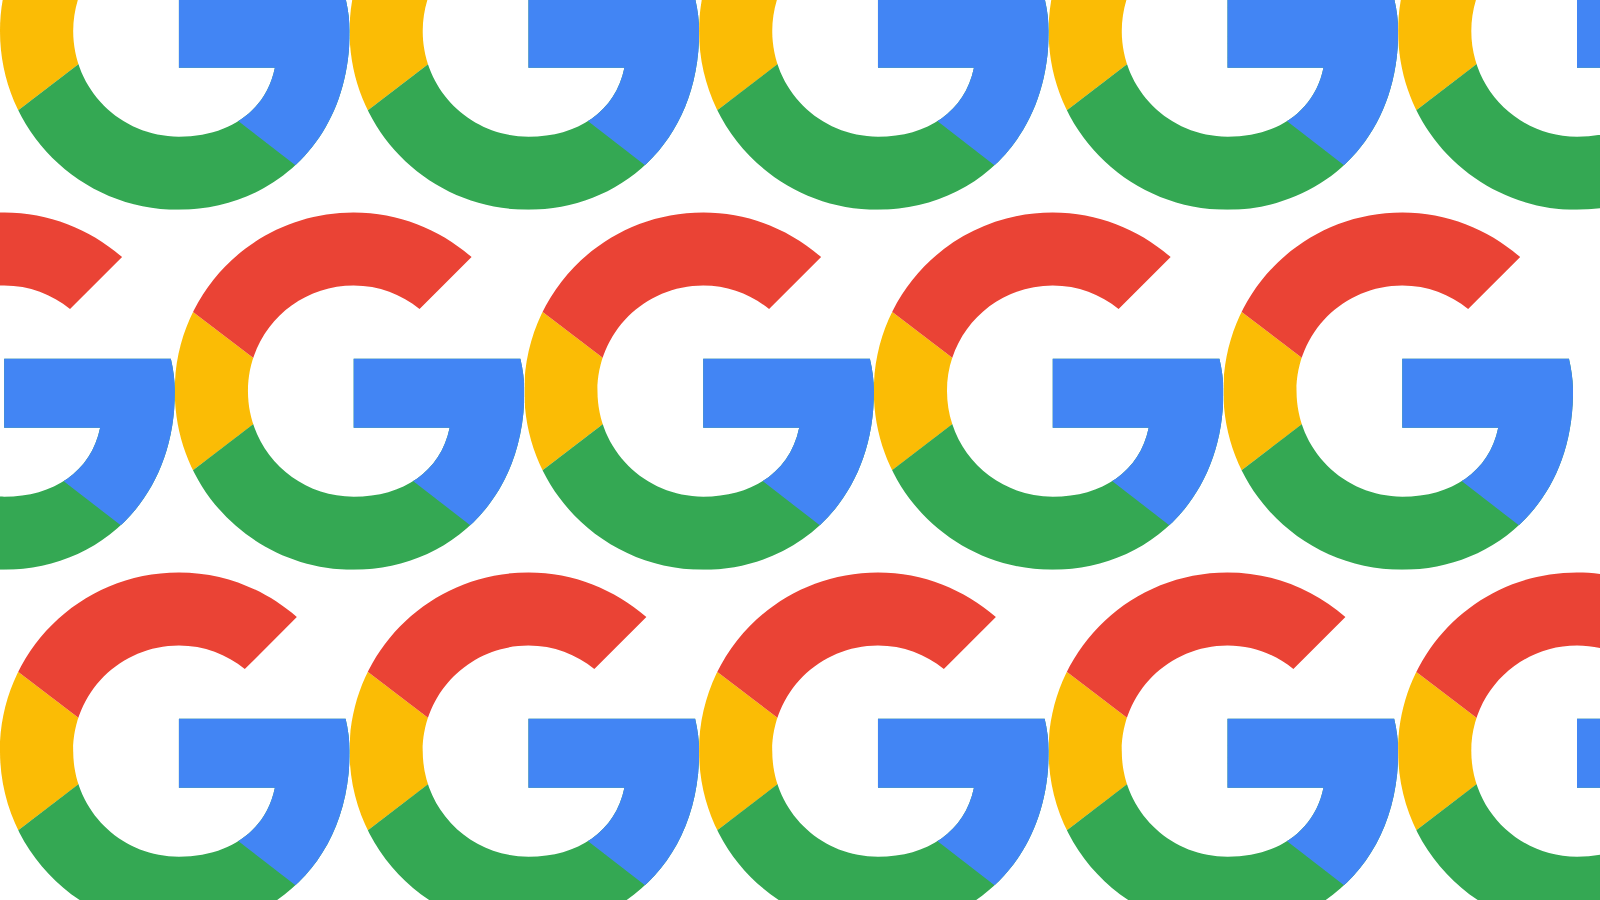 The Google Logo in a repeated pattern